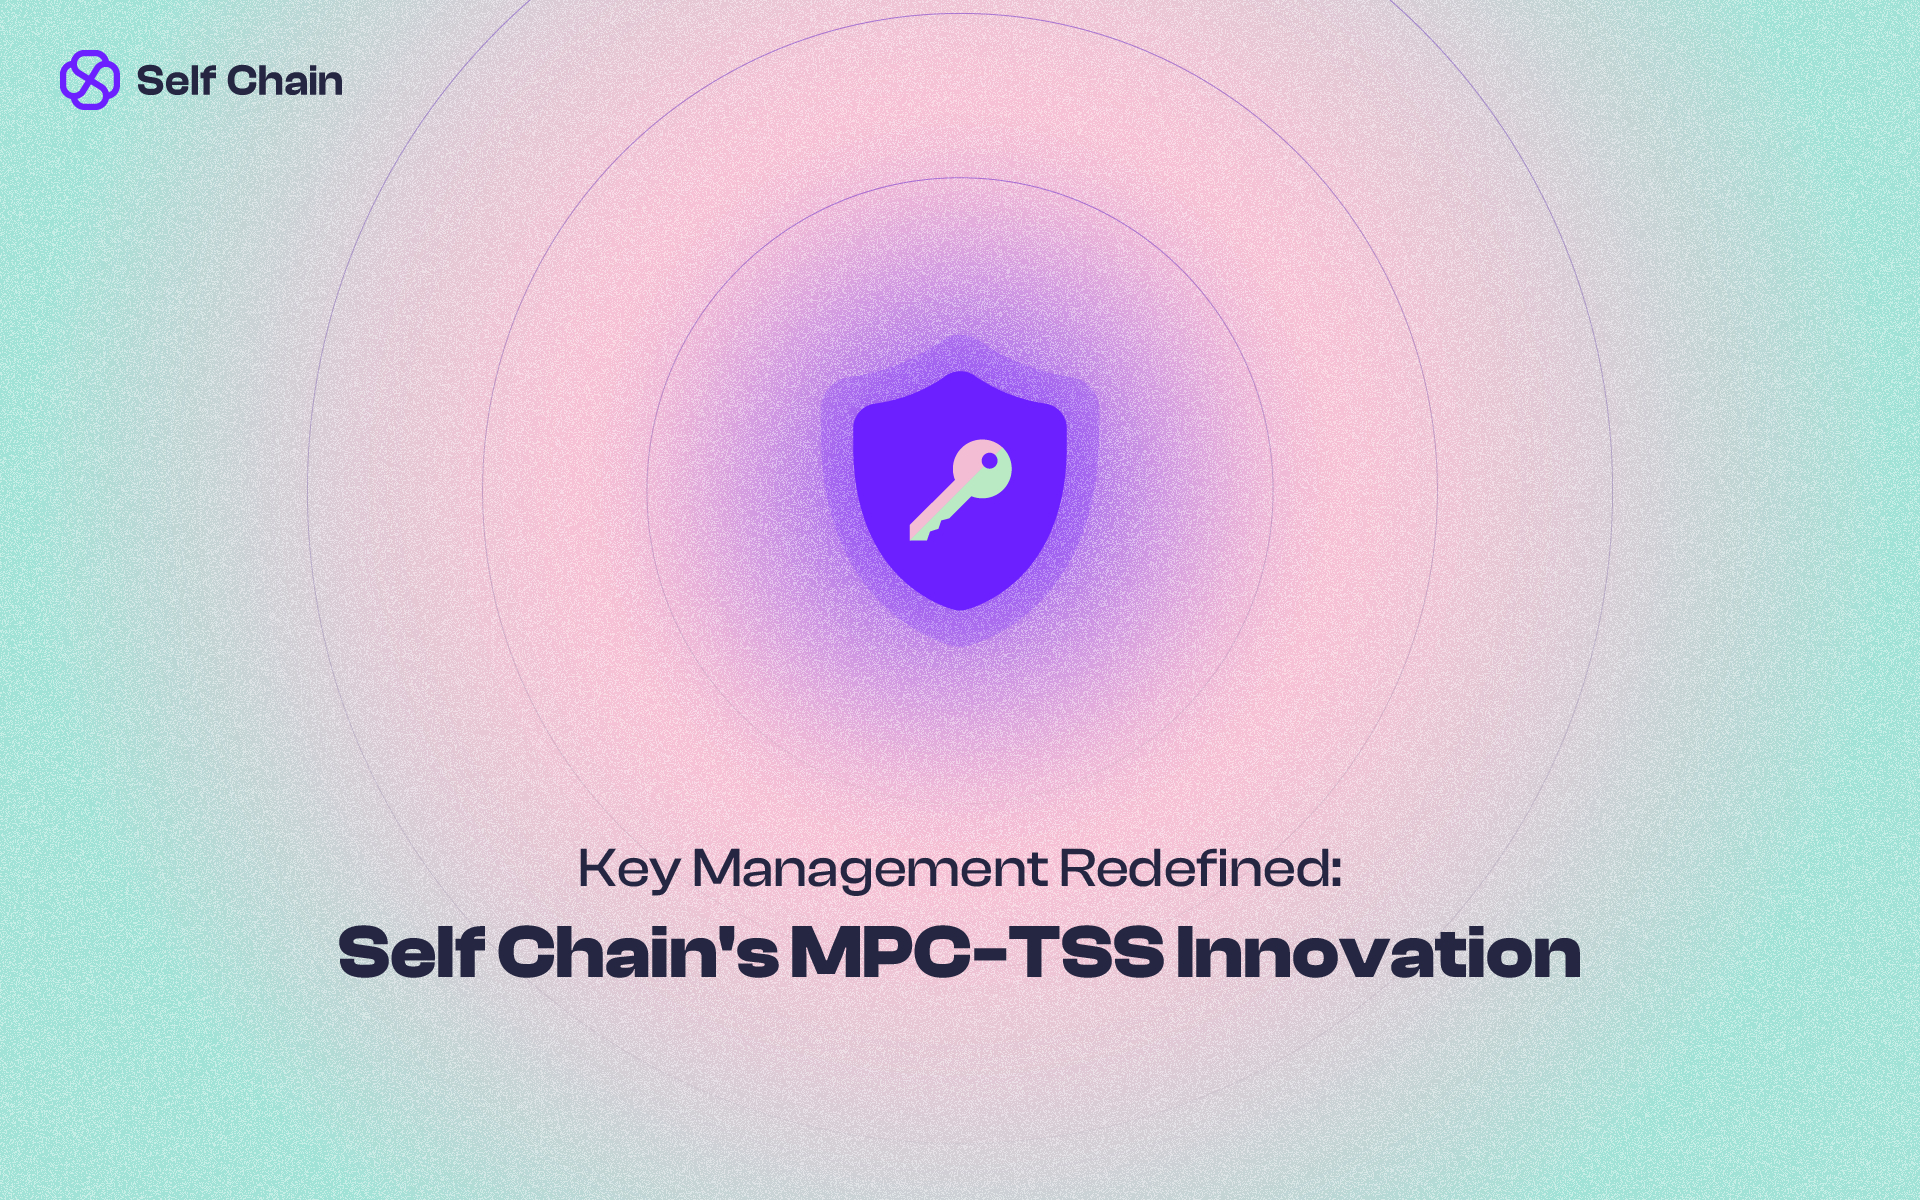 Key Management Redefined: Self Chain’s MPC - TSS Innovation